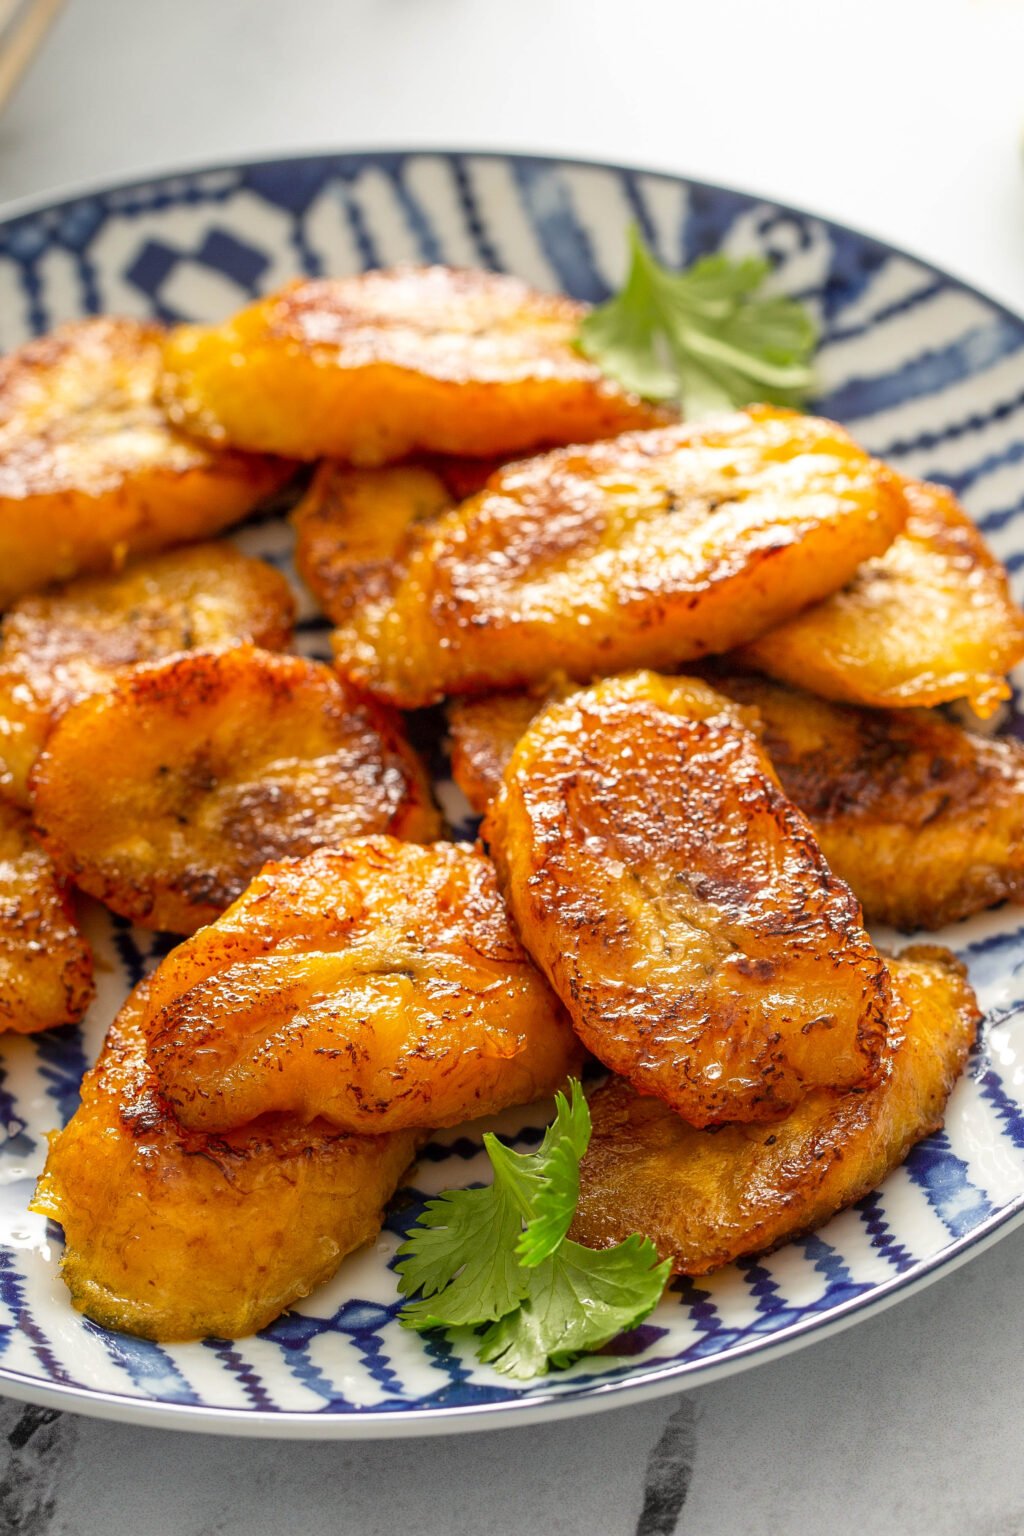 Puerto Rican Fried Plantains | Quick & Easy Sweet Plantains Recipe